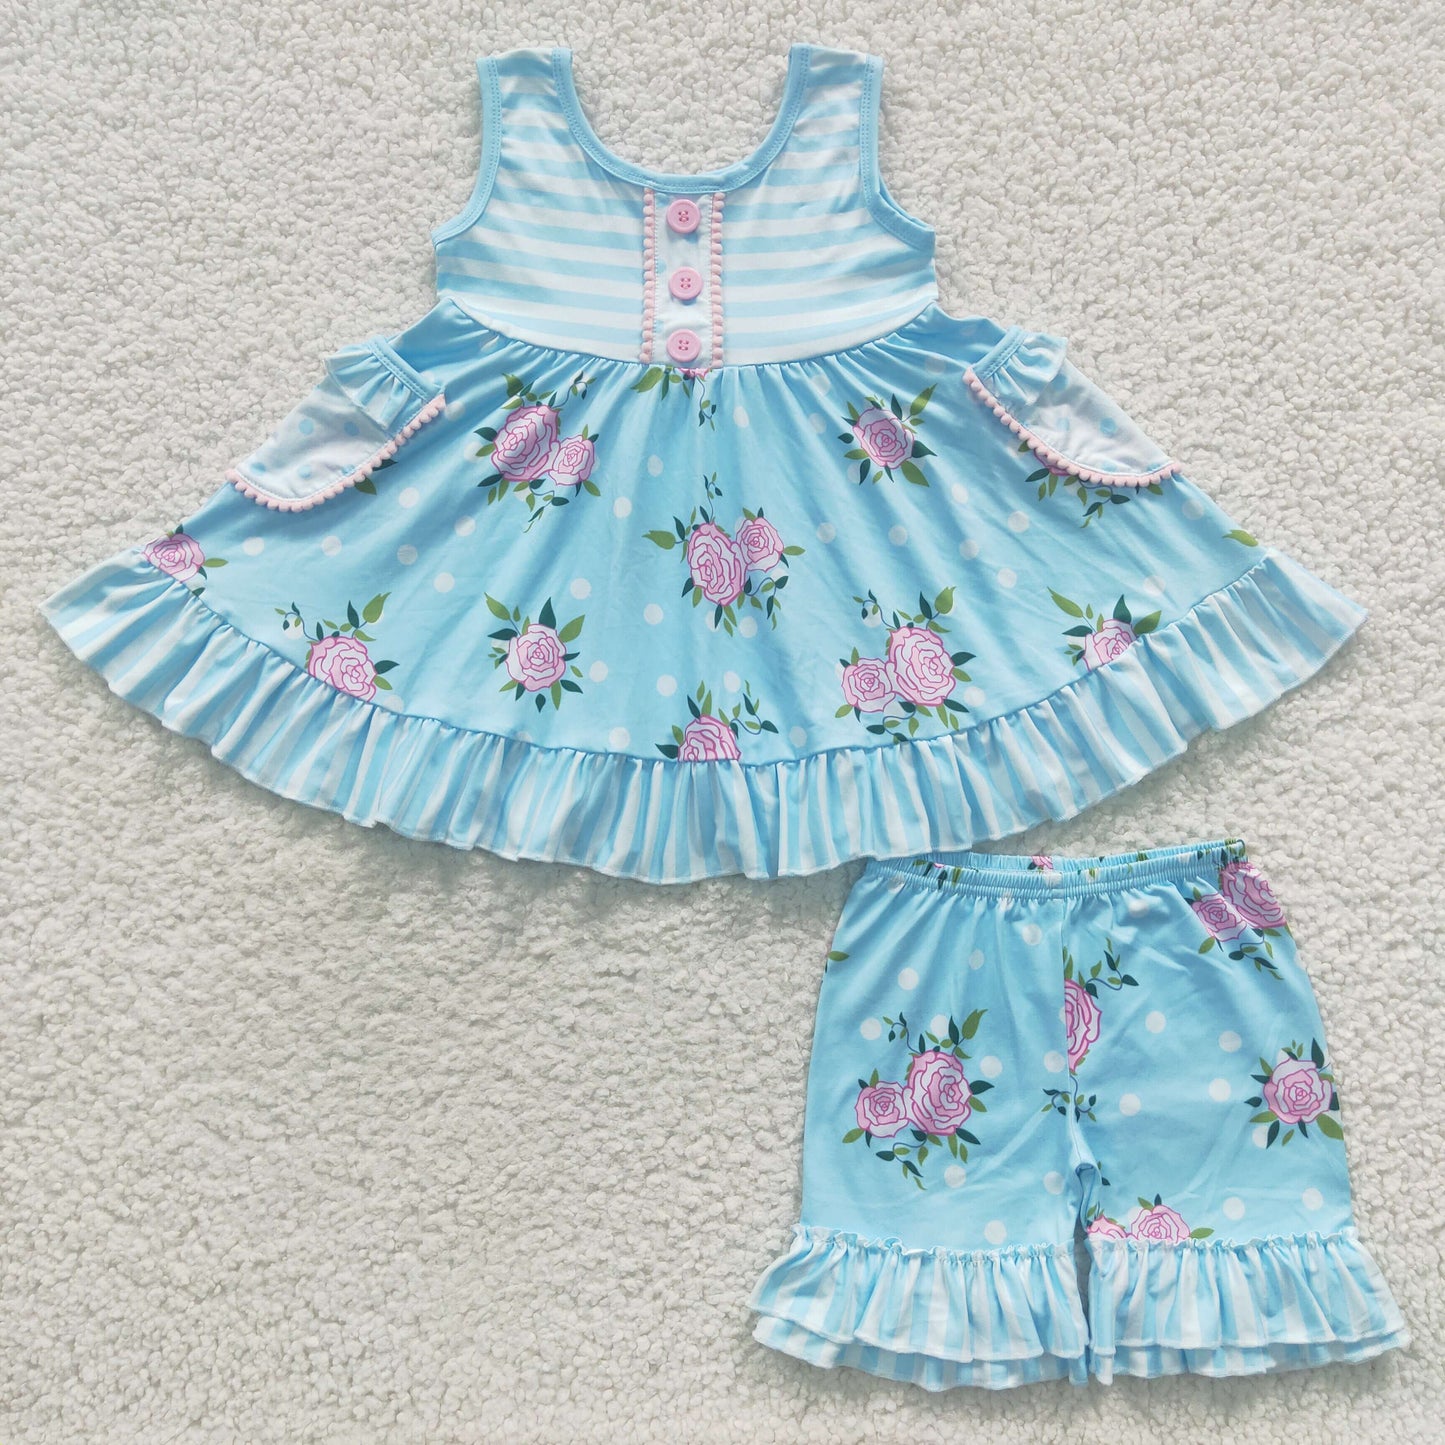 Girls blue floral summer outfit